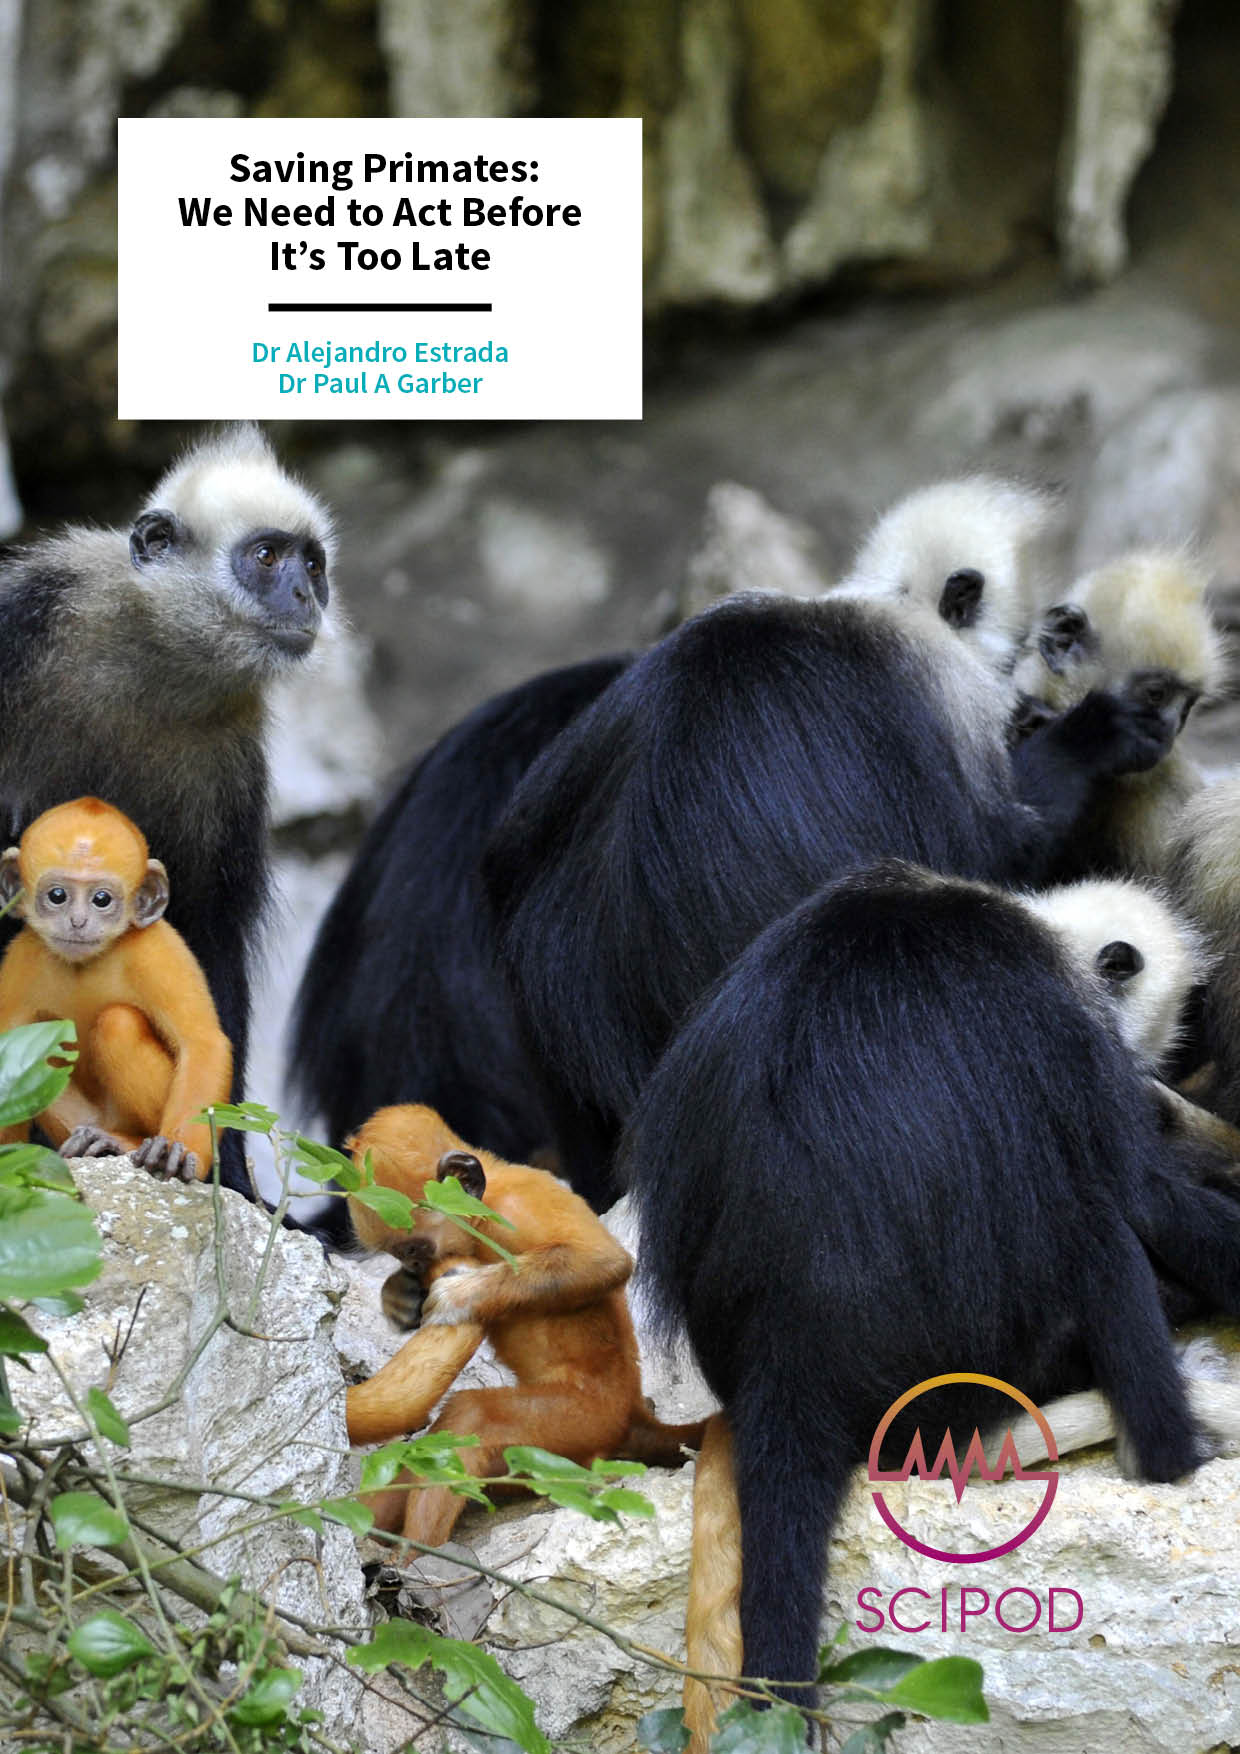 Saving Primates We Need to Act Before It’s Too Late – Drs Alejandro Estrada and Paul A Garber